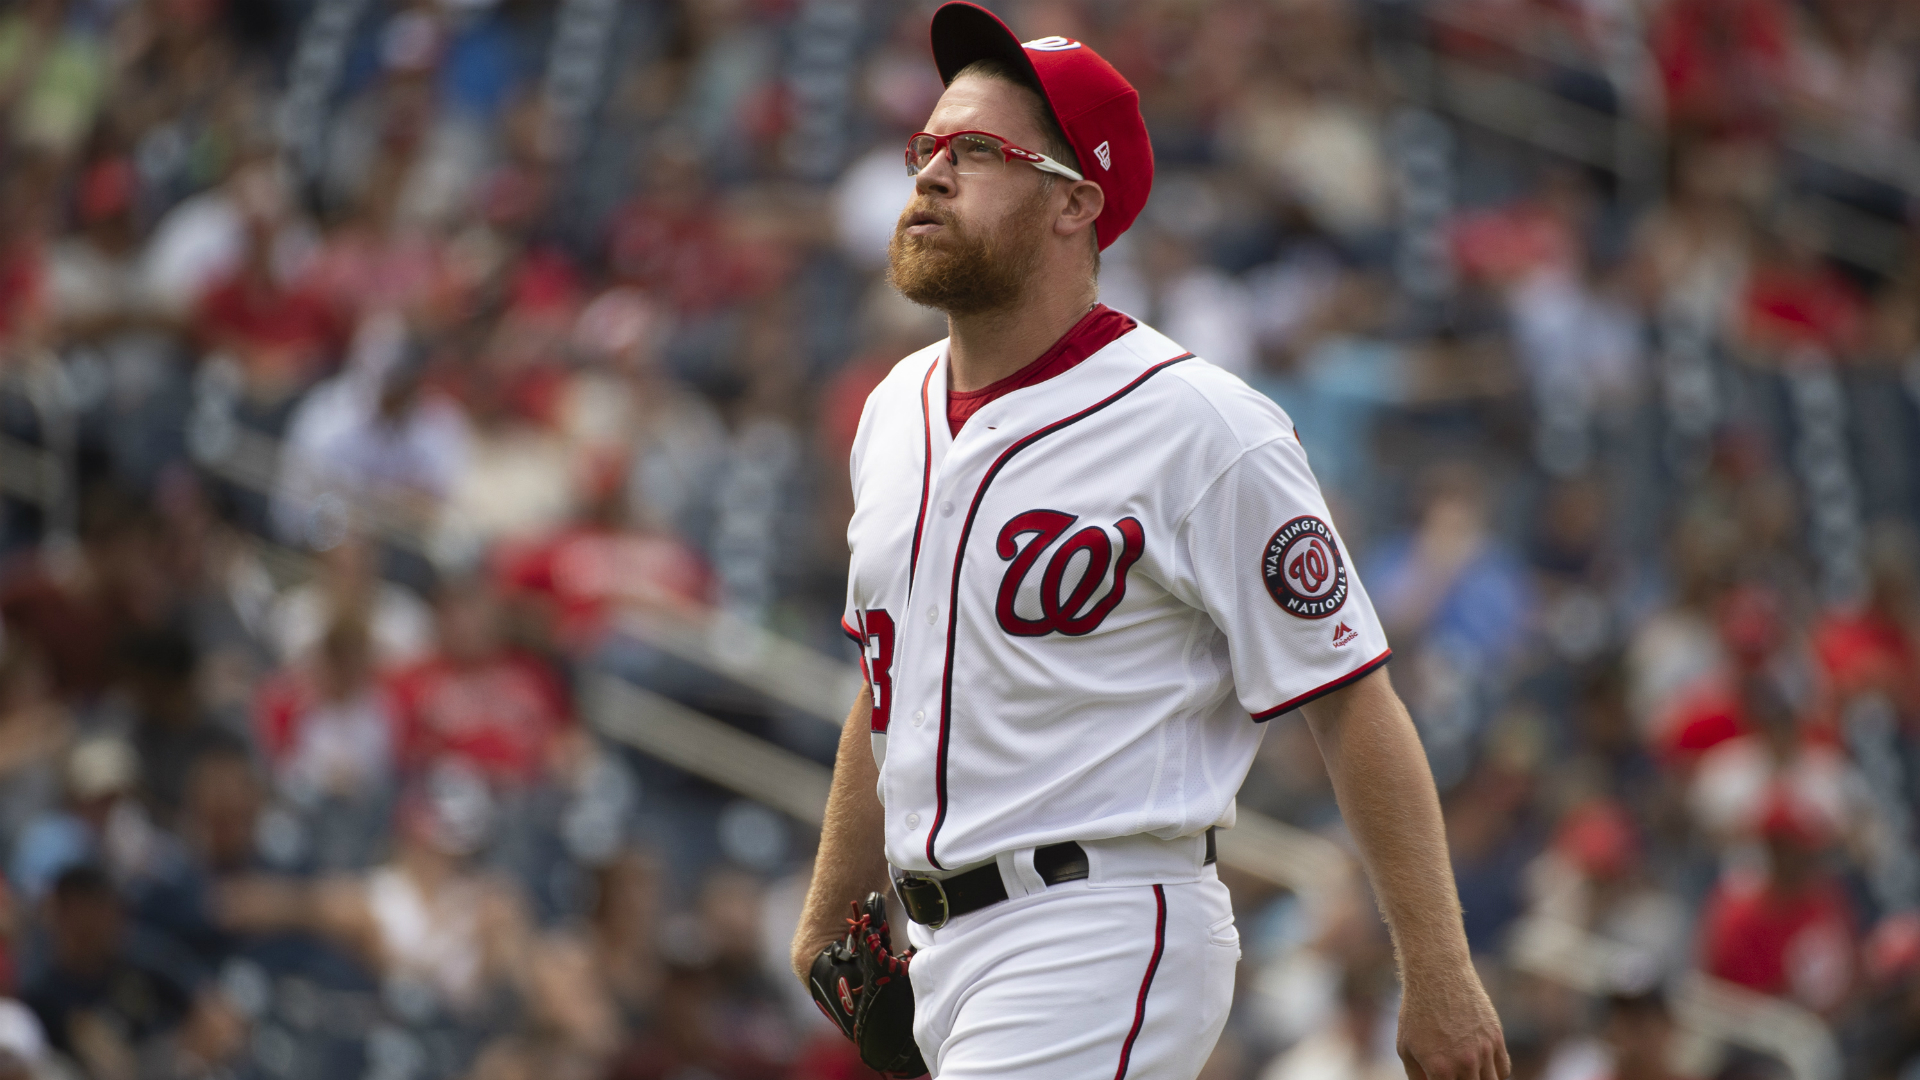 Nats' Sean Doolittle on Recent Protests: ‘This Is Our Generation's Civil Rights Movement'